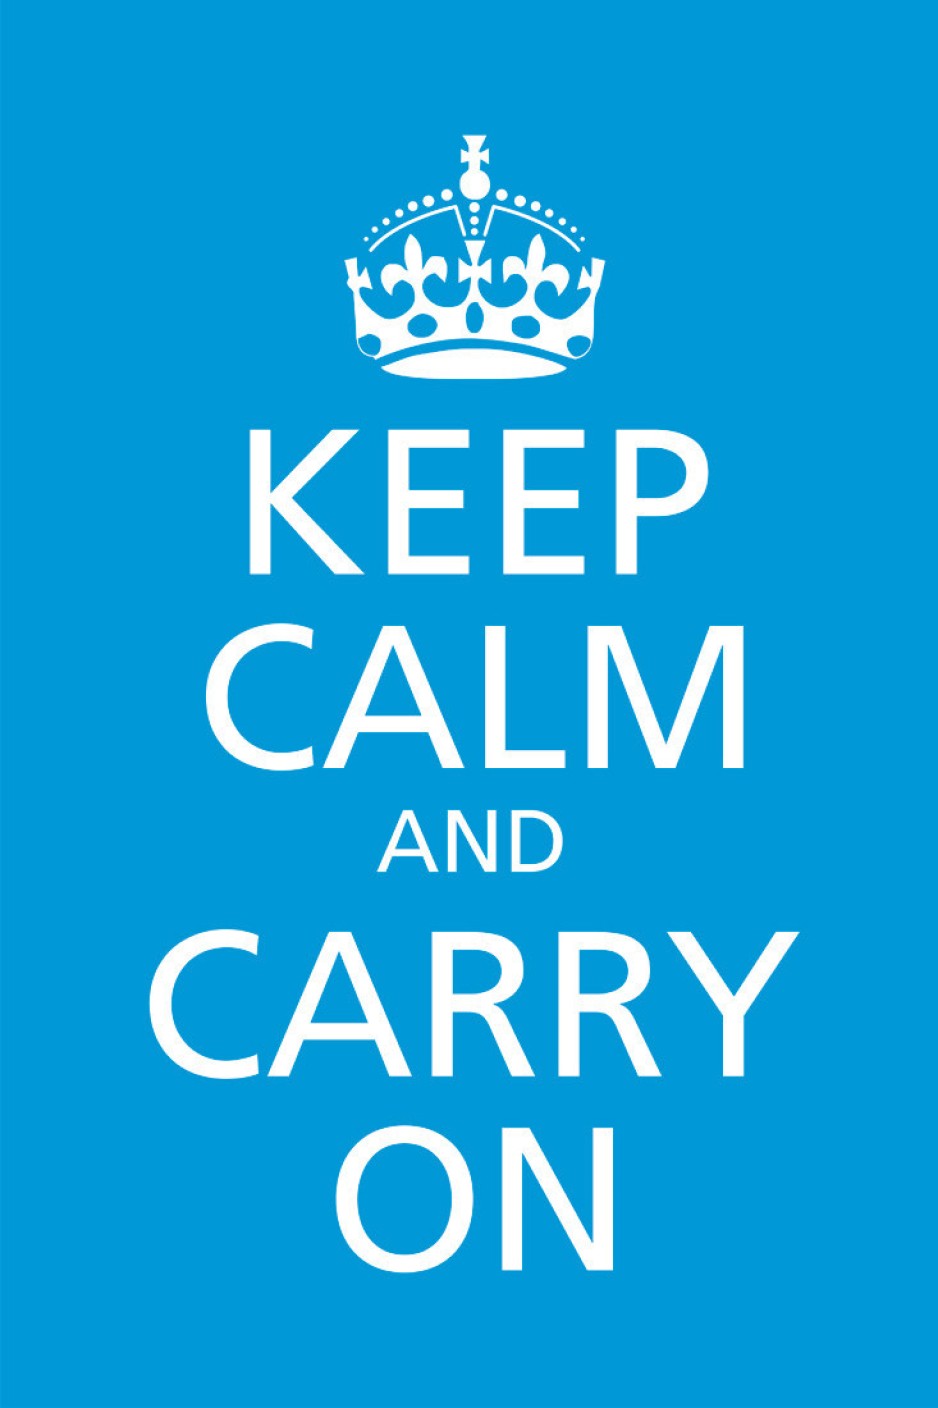 Keep Calm and Carry On Paper Print - Quotes & Motivation posters in India - Buy art, film ...